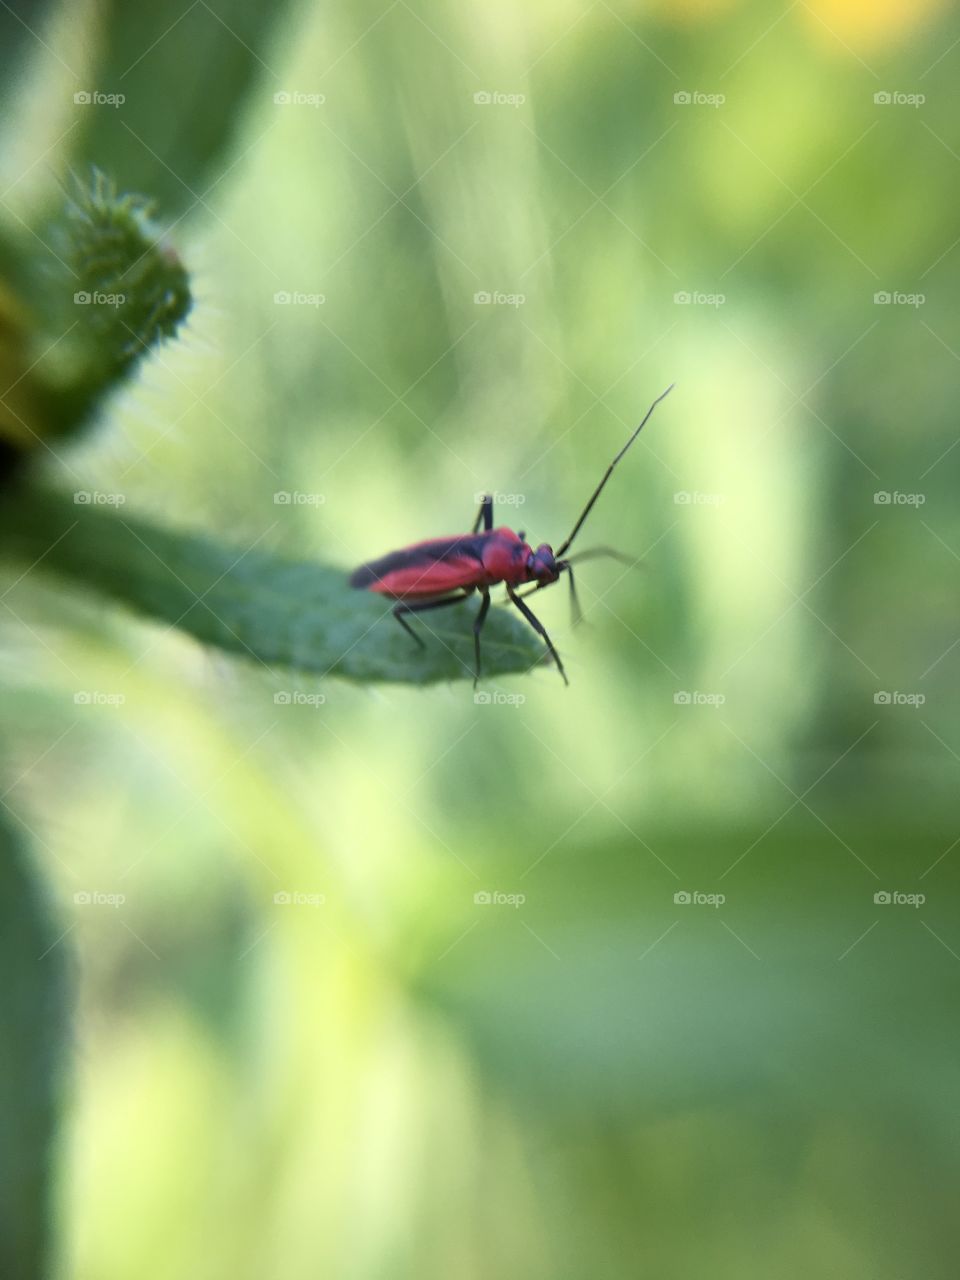 Red bug taking off from leaf